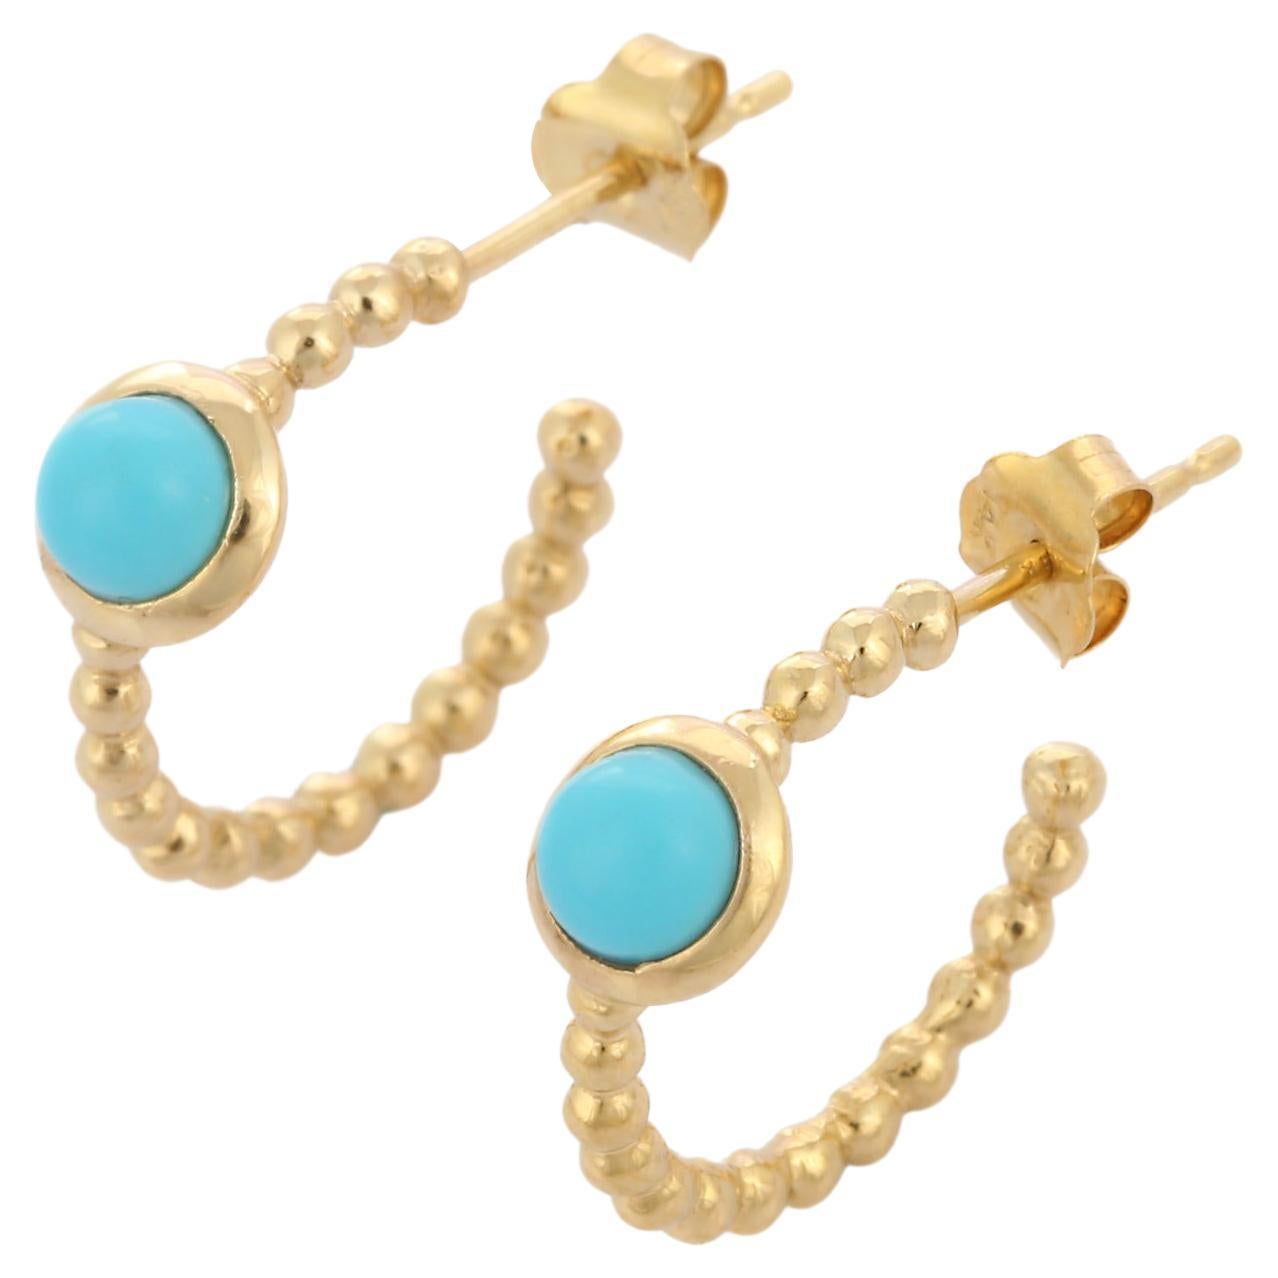 14K Solid Yellow Gold Minimal C-Hoop Earrings with Bezel Set Turquoise